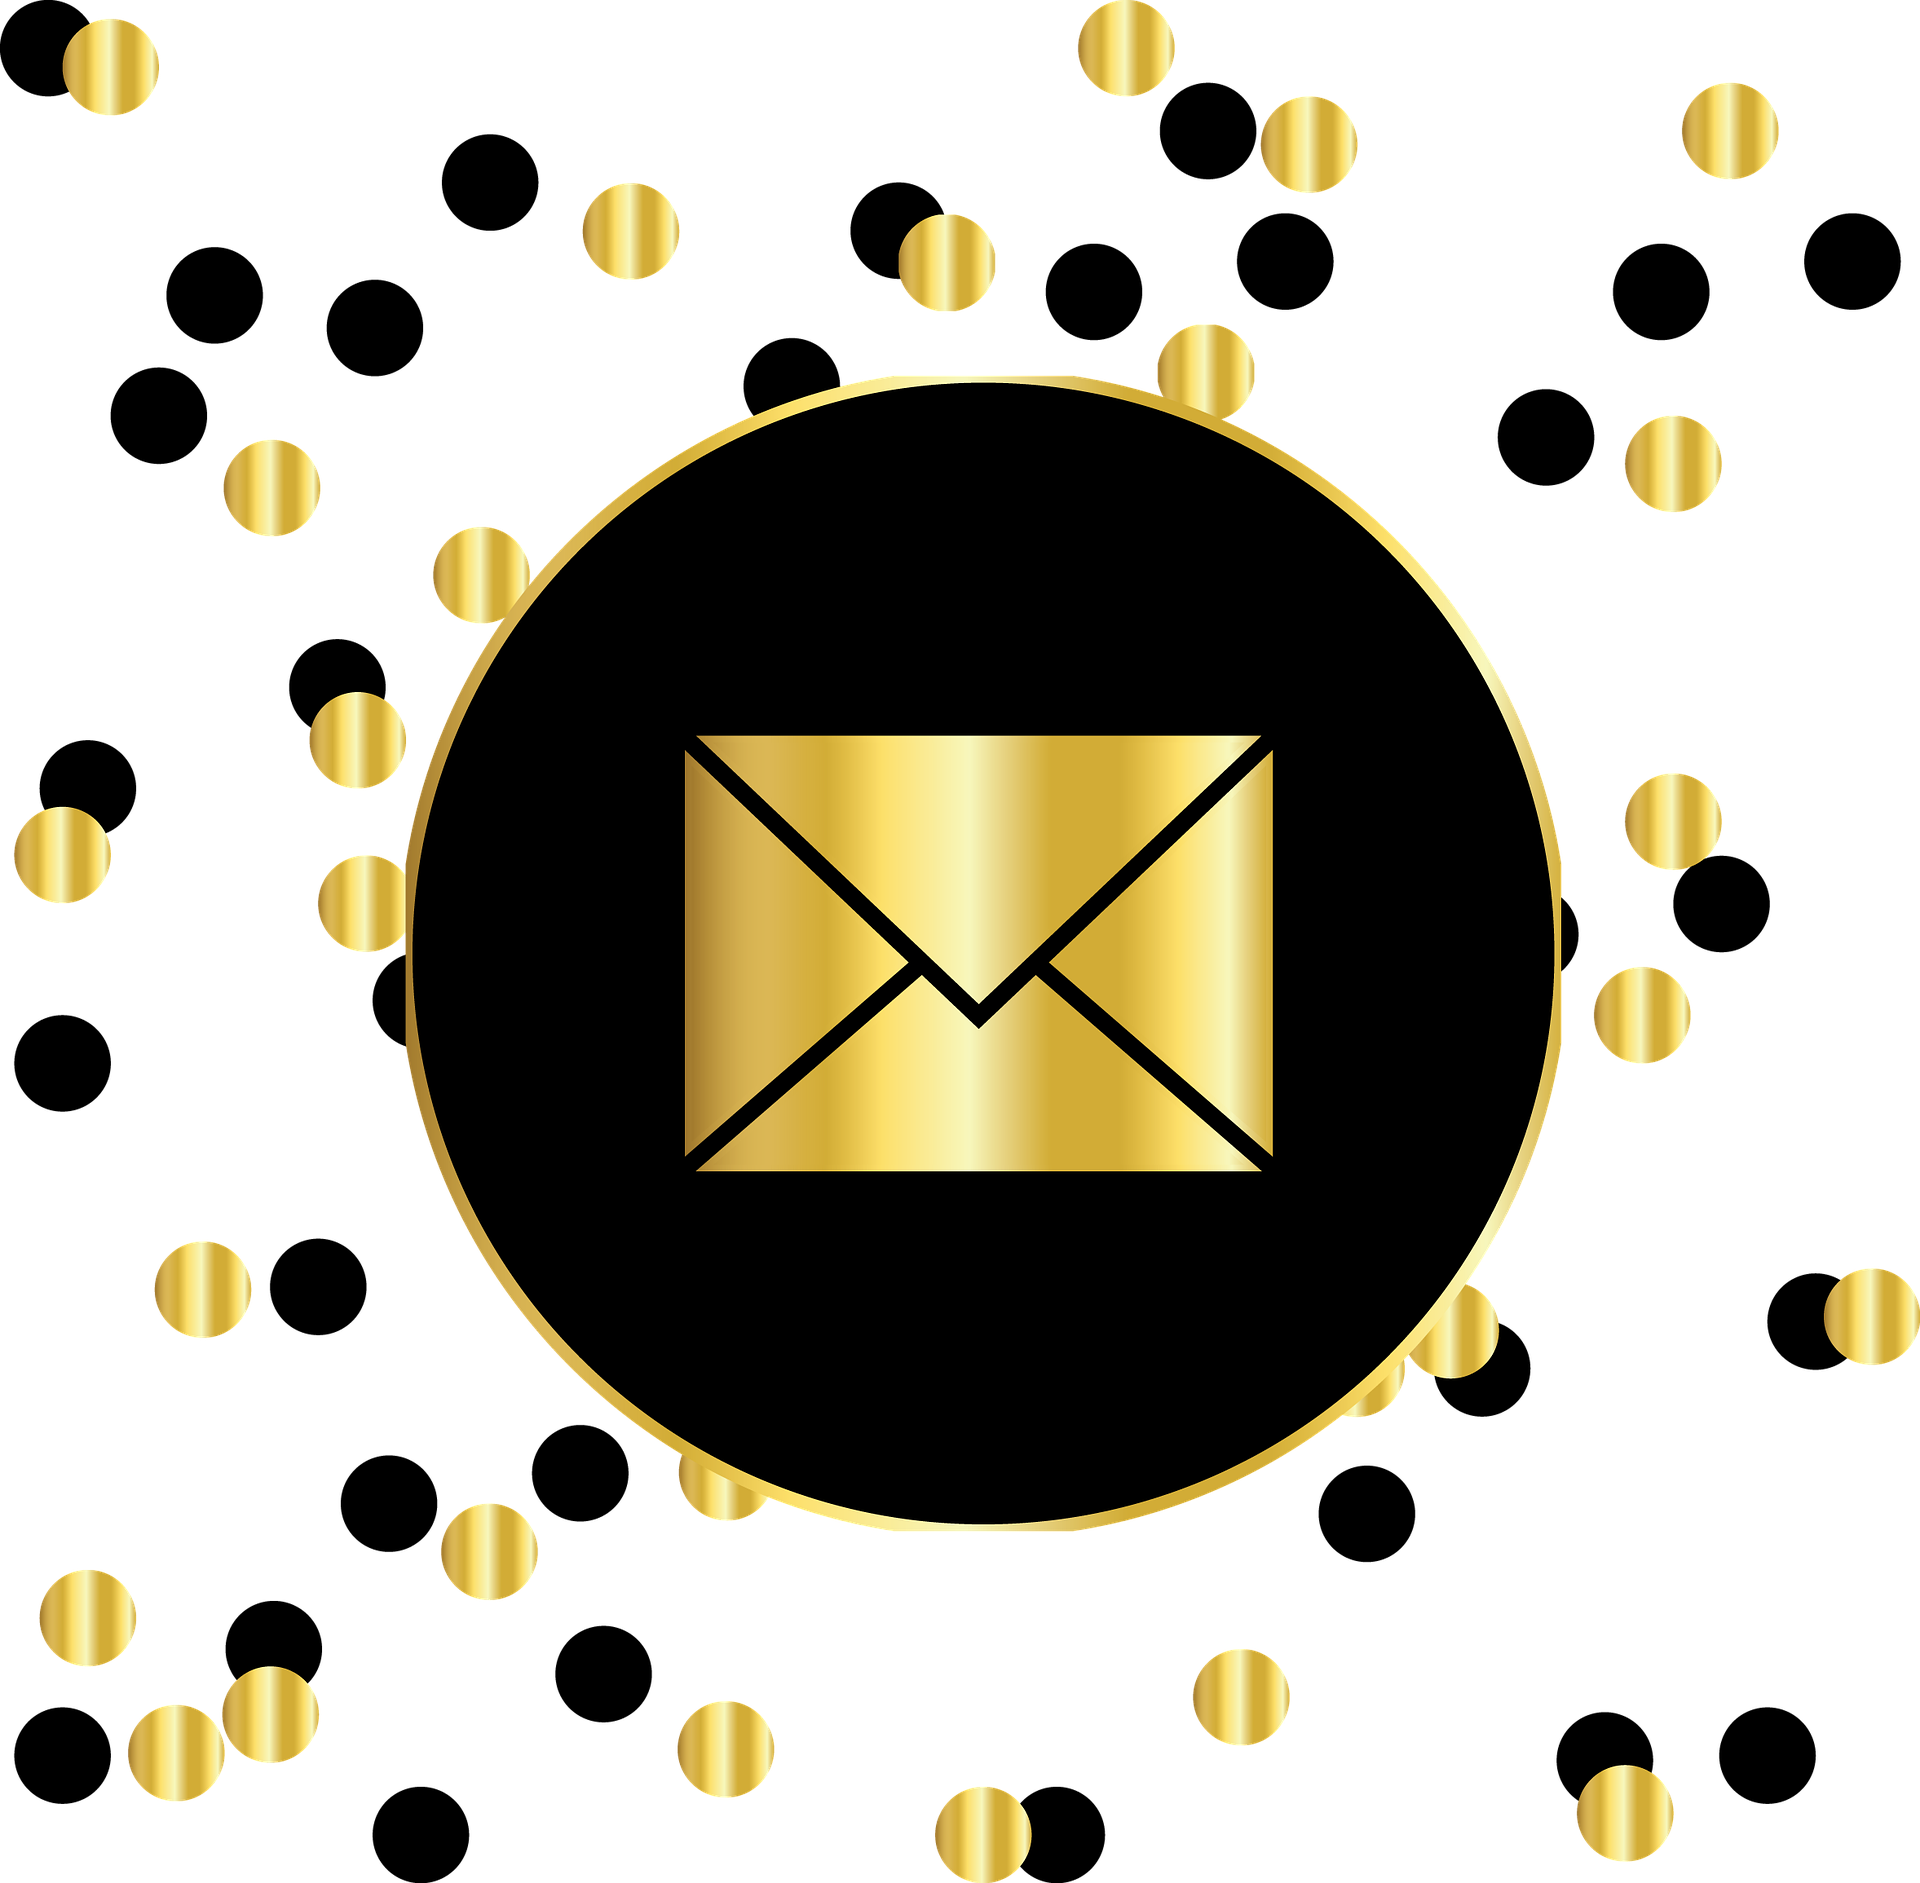 Email Marketing is Essential to Your Small Business!